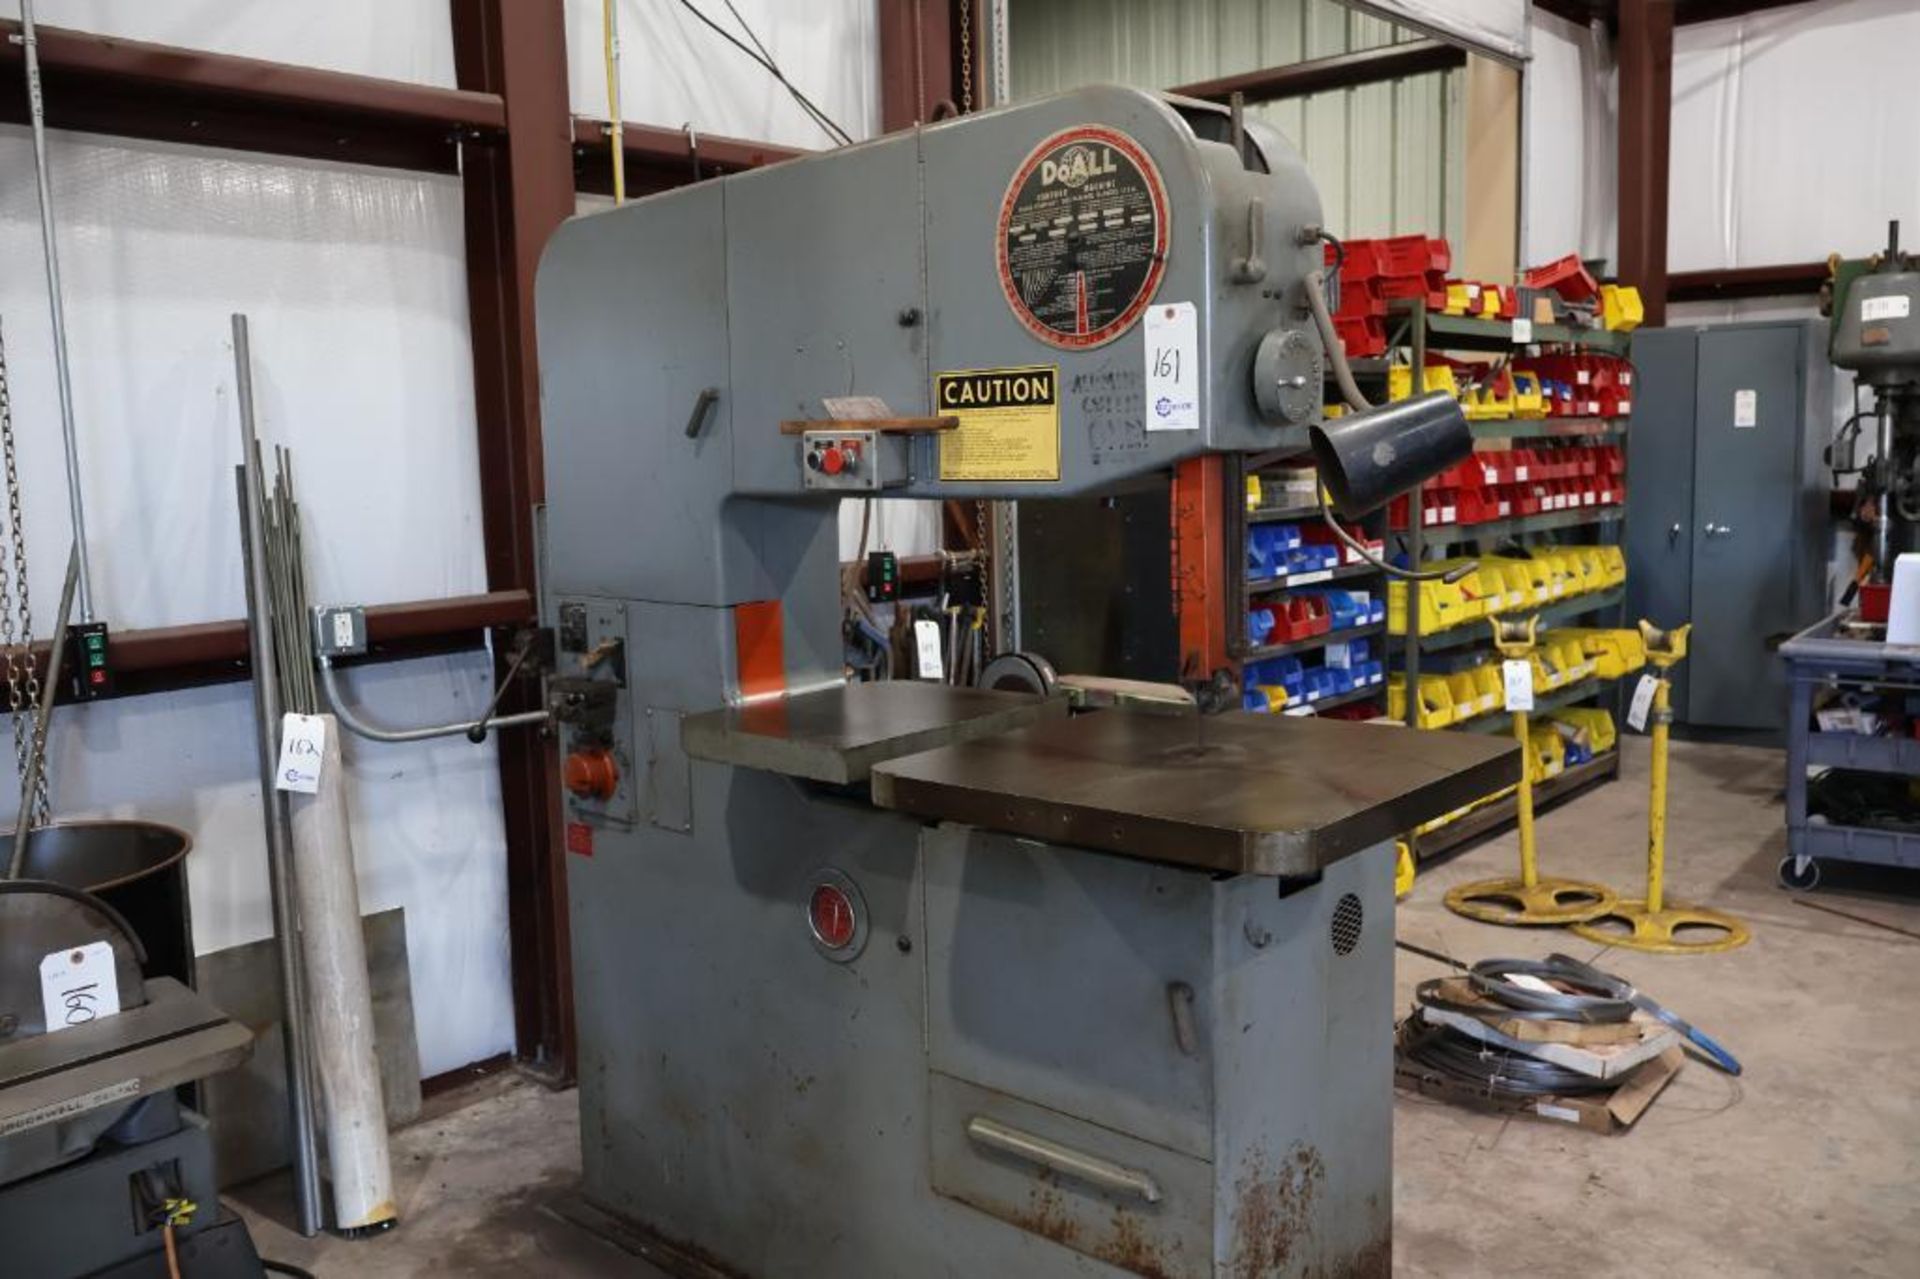 DoAll 3613-0 36" vertical bandsaw 1PH - Image 3 of 20